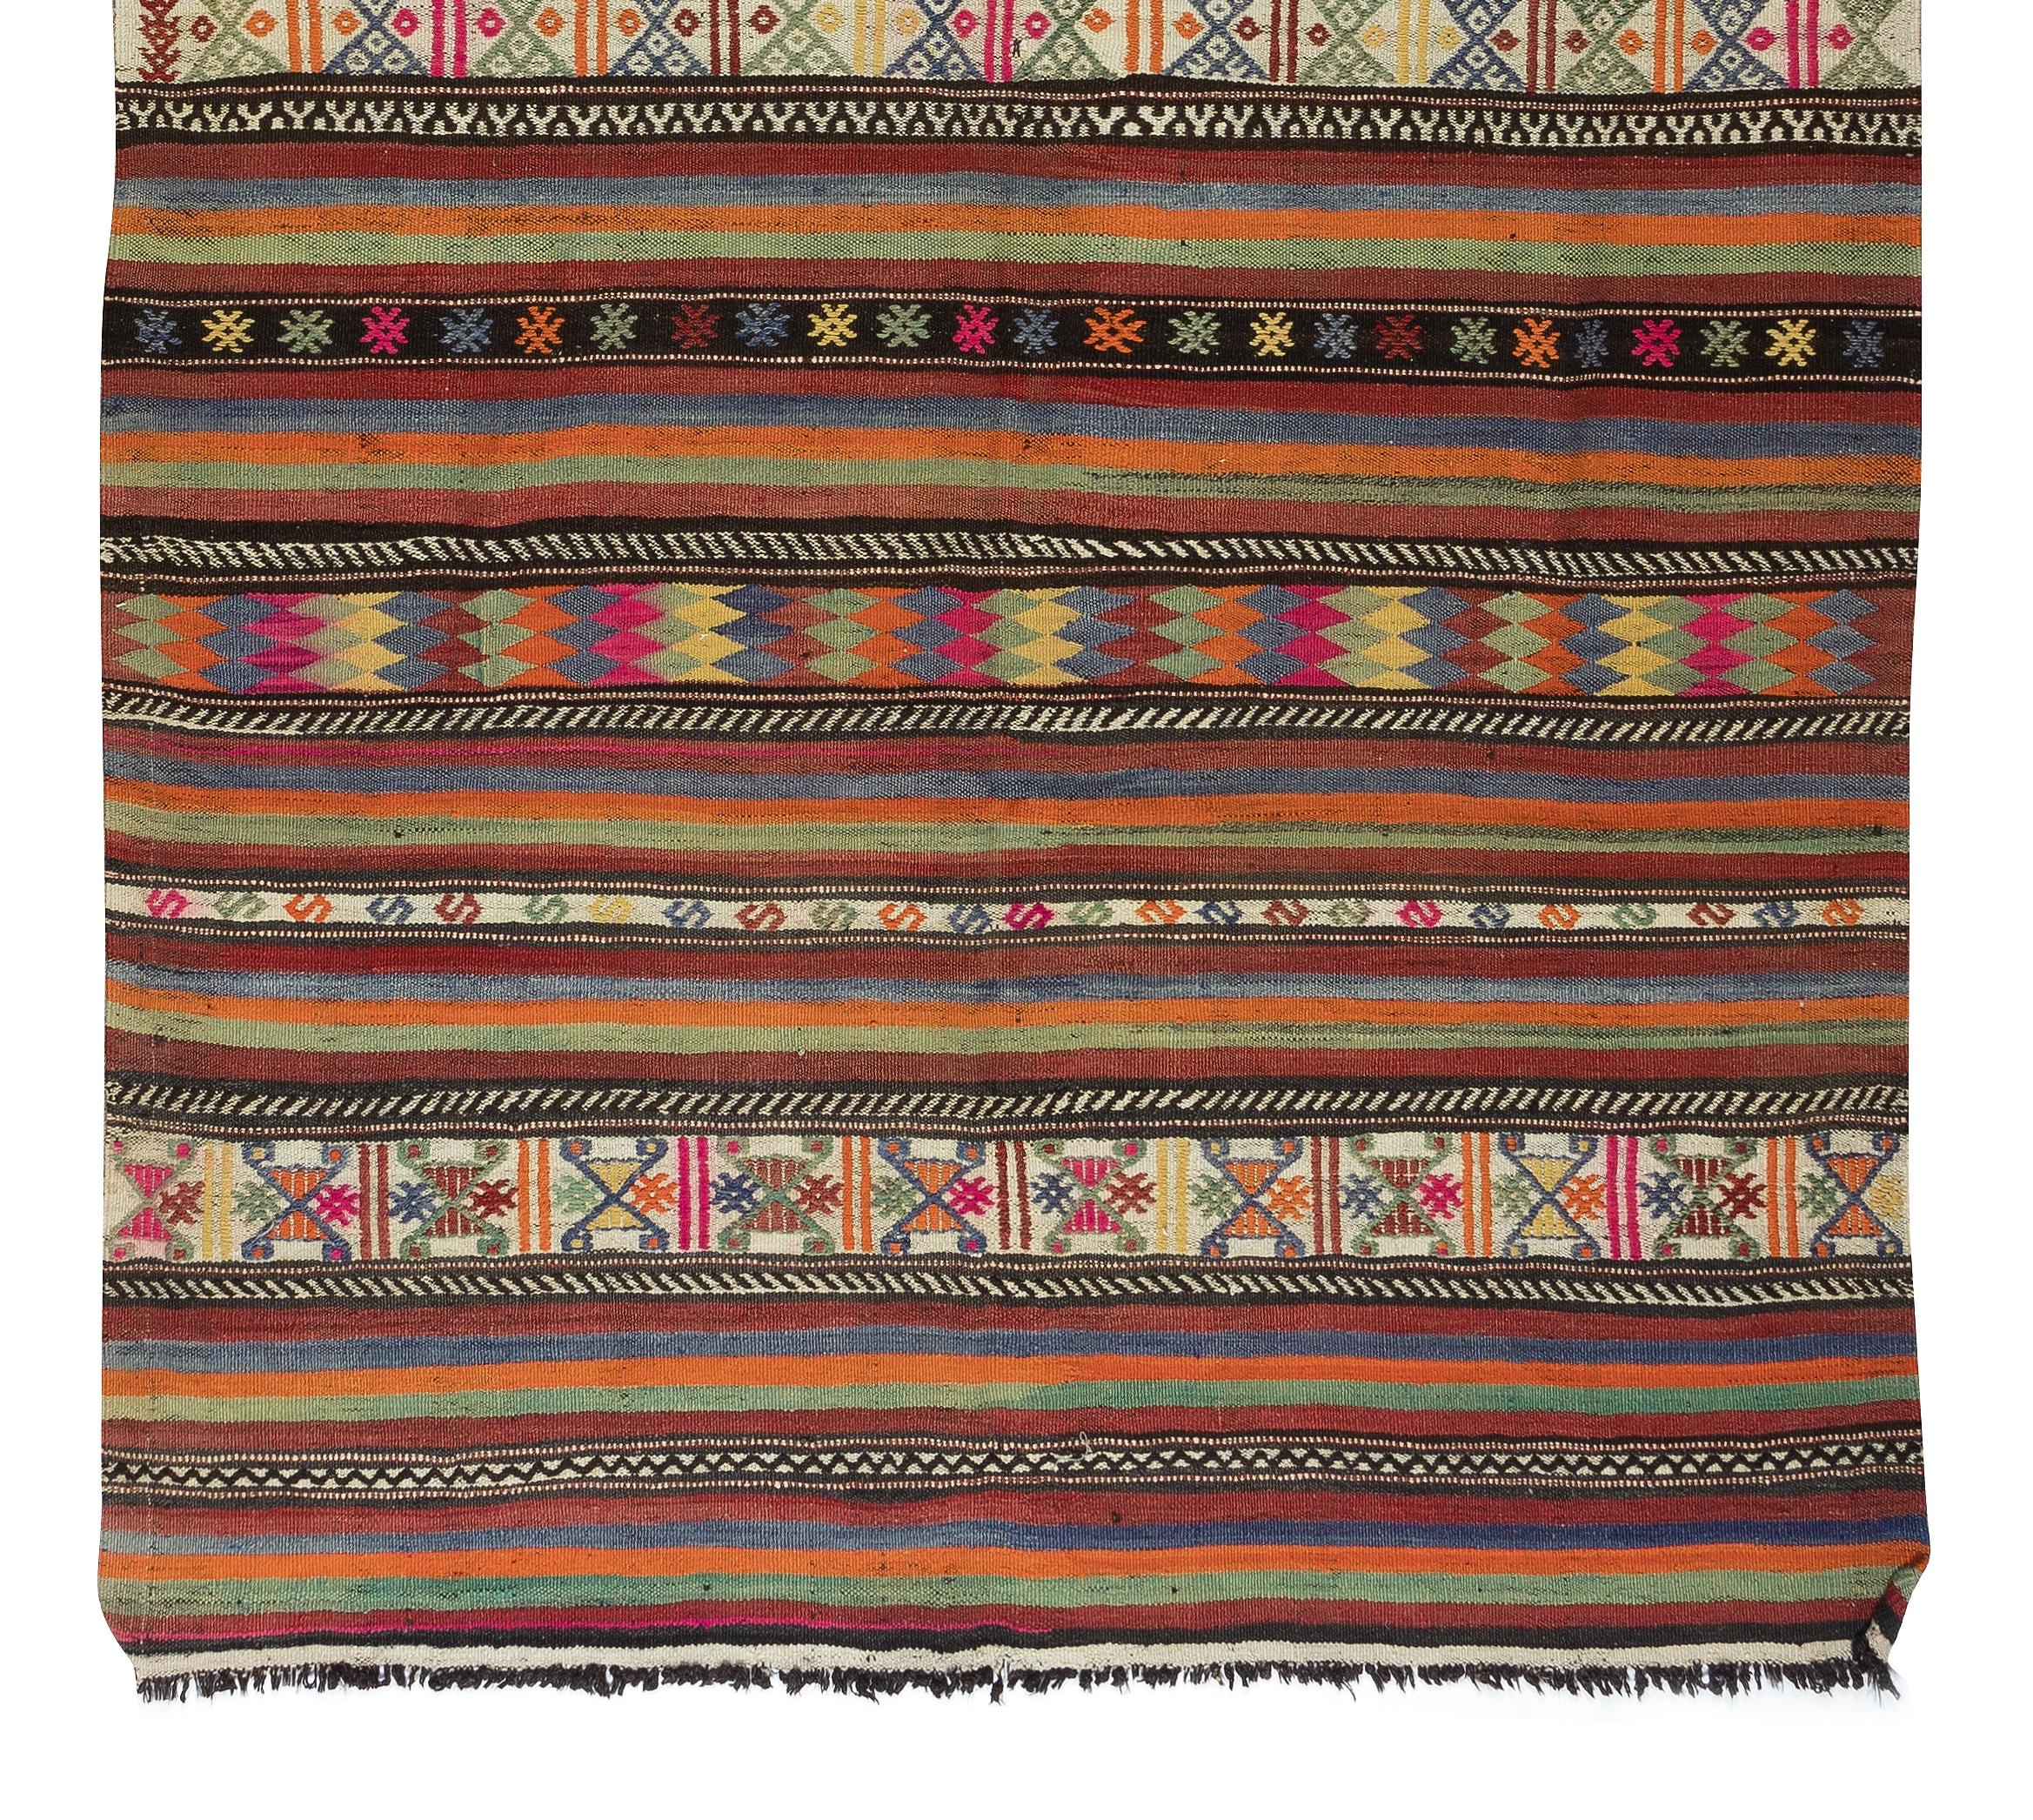 20th Century 5.3x9.6 Ft Colorful Kilim Made of Hand-Spun Wool, Hand-Woven Turkish Striped Rug For Sale